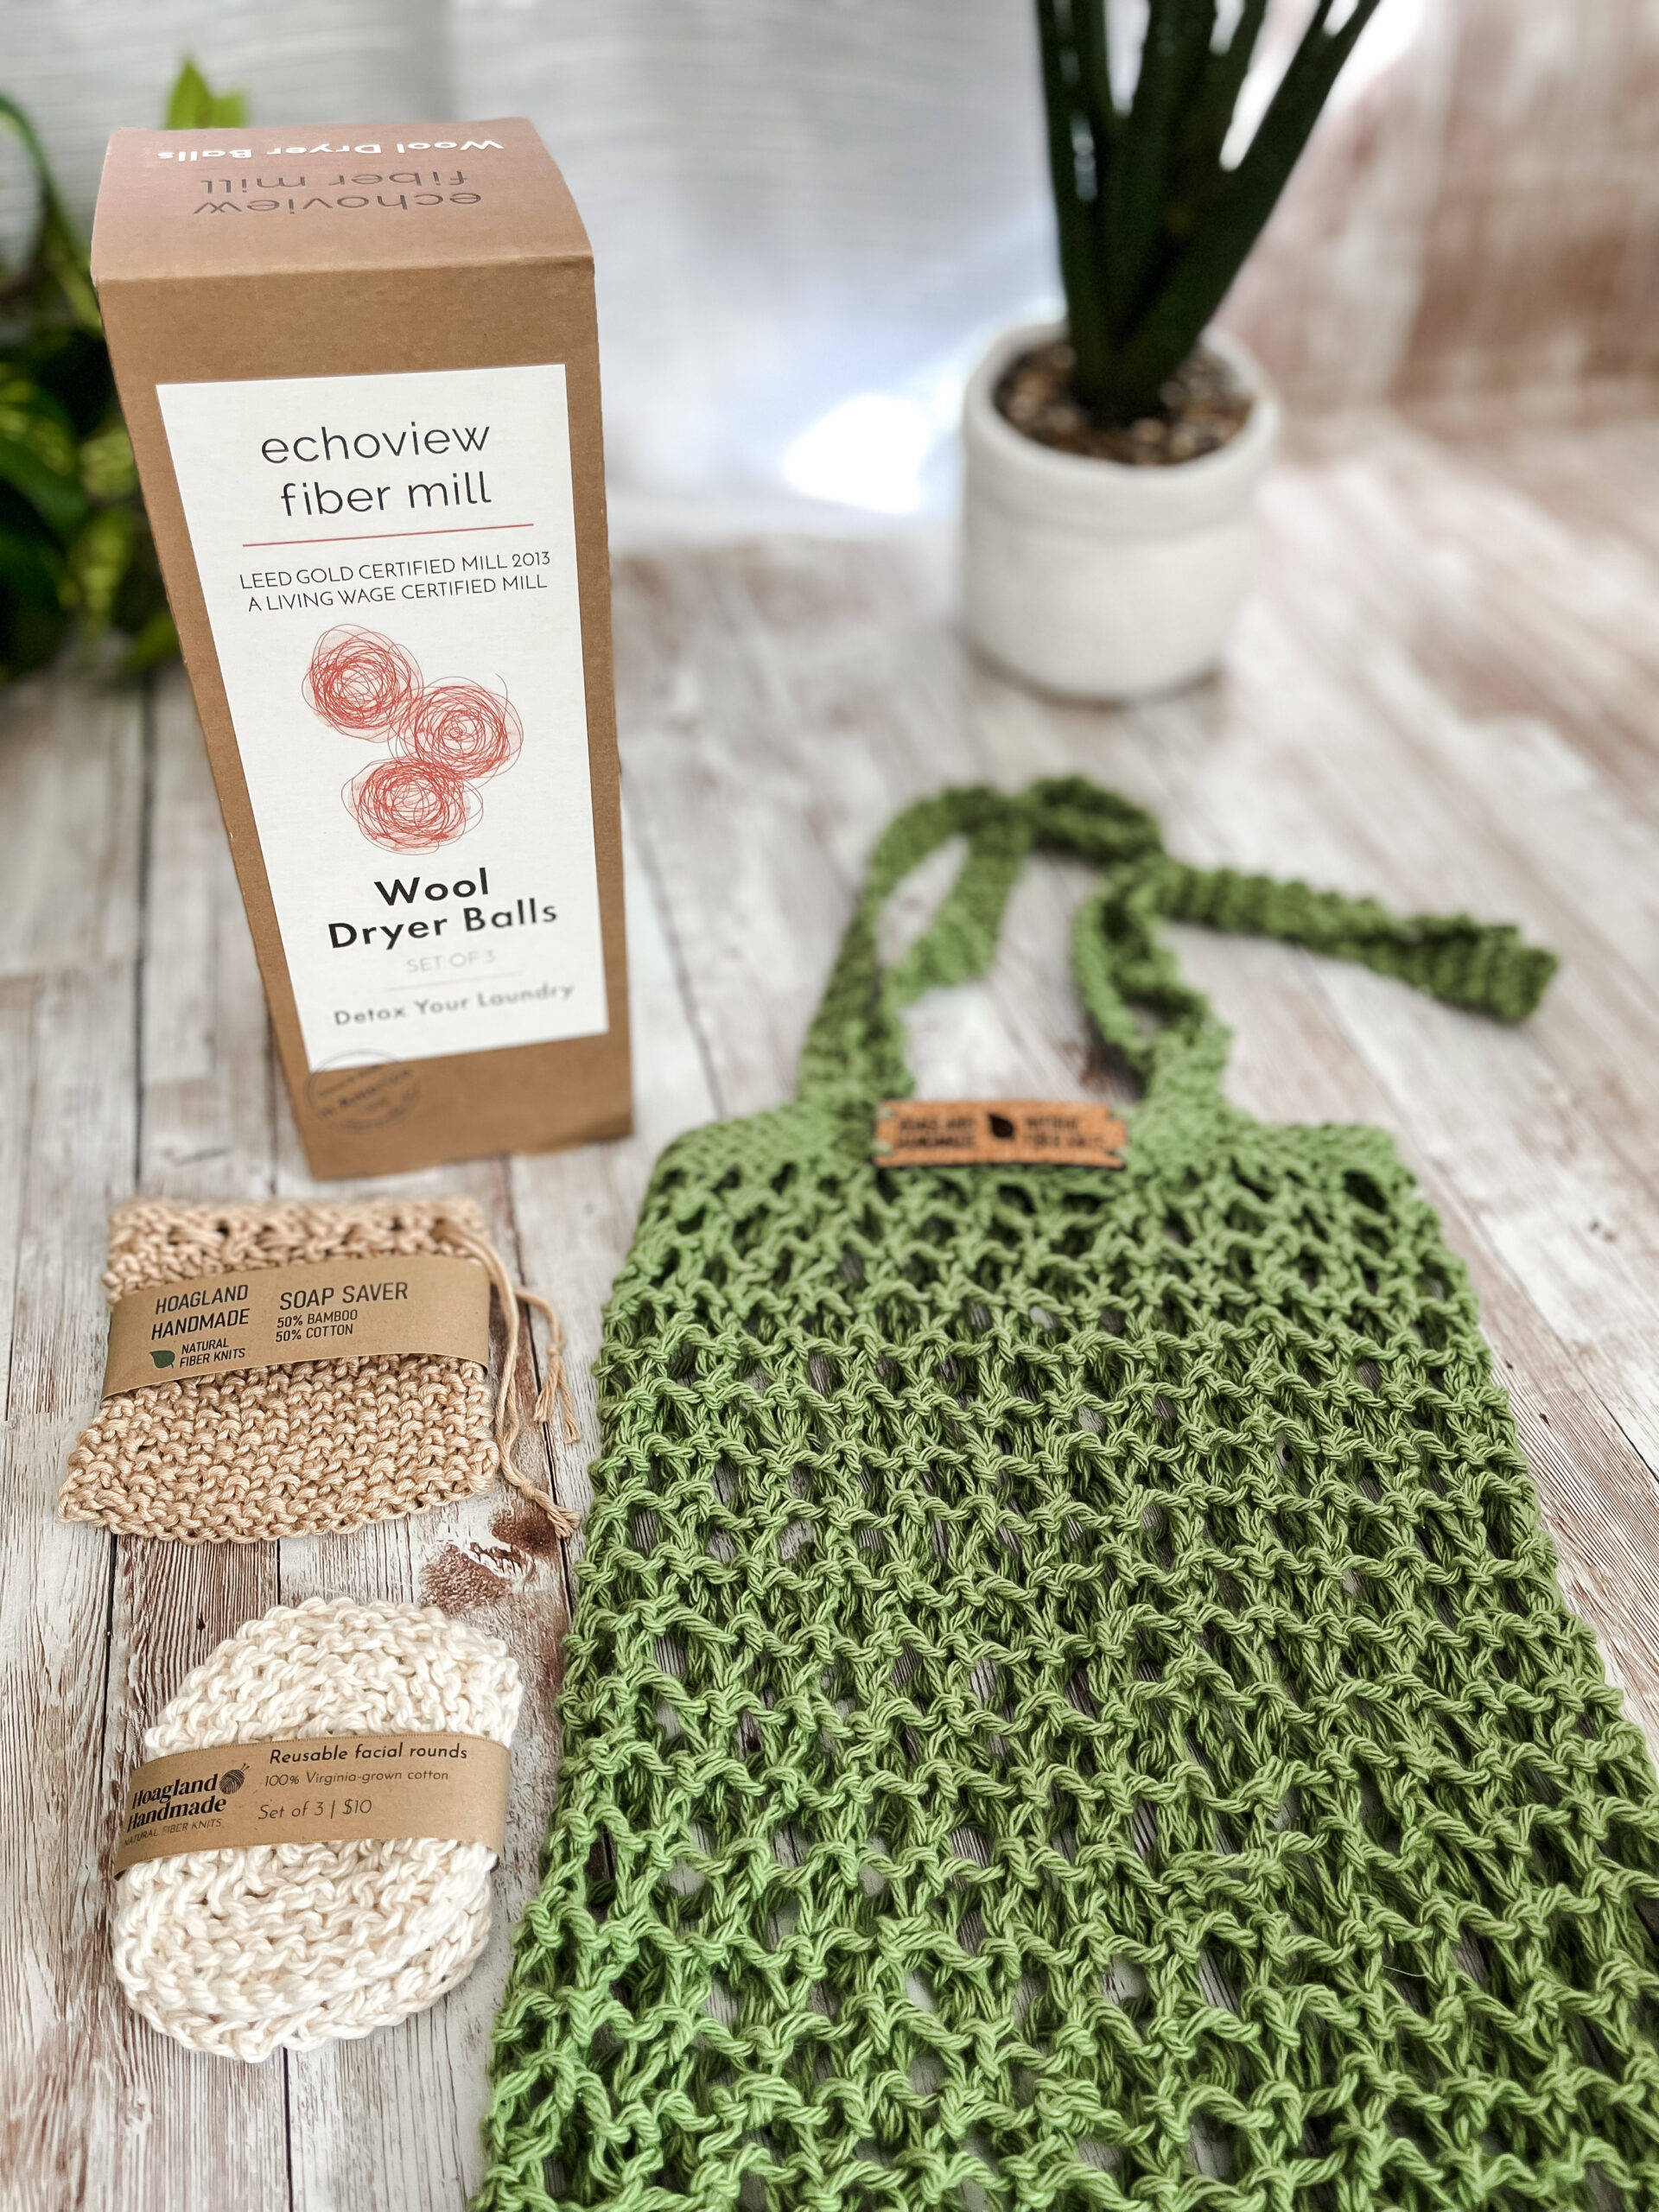 The Zero Waste gift set is pictured showing a box of 3 US Wool dryer balls, a tan bamboo/cotton soap saver pouch wrapped in a kraft paper label from Hoagland Handmade, a set of 3 usable facial rounds knit from Virginia-grown cotton and wrapped in a a kraft paper label from Hoagland Handmade, and a green recycled cotton knit market tote